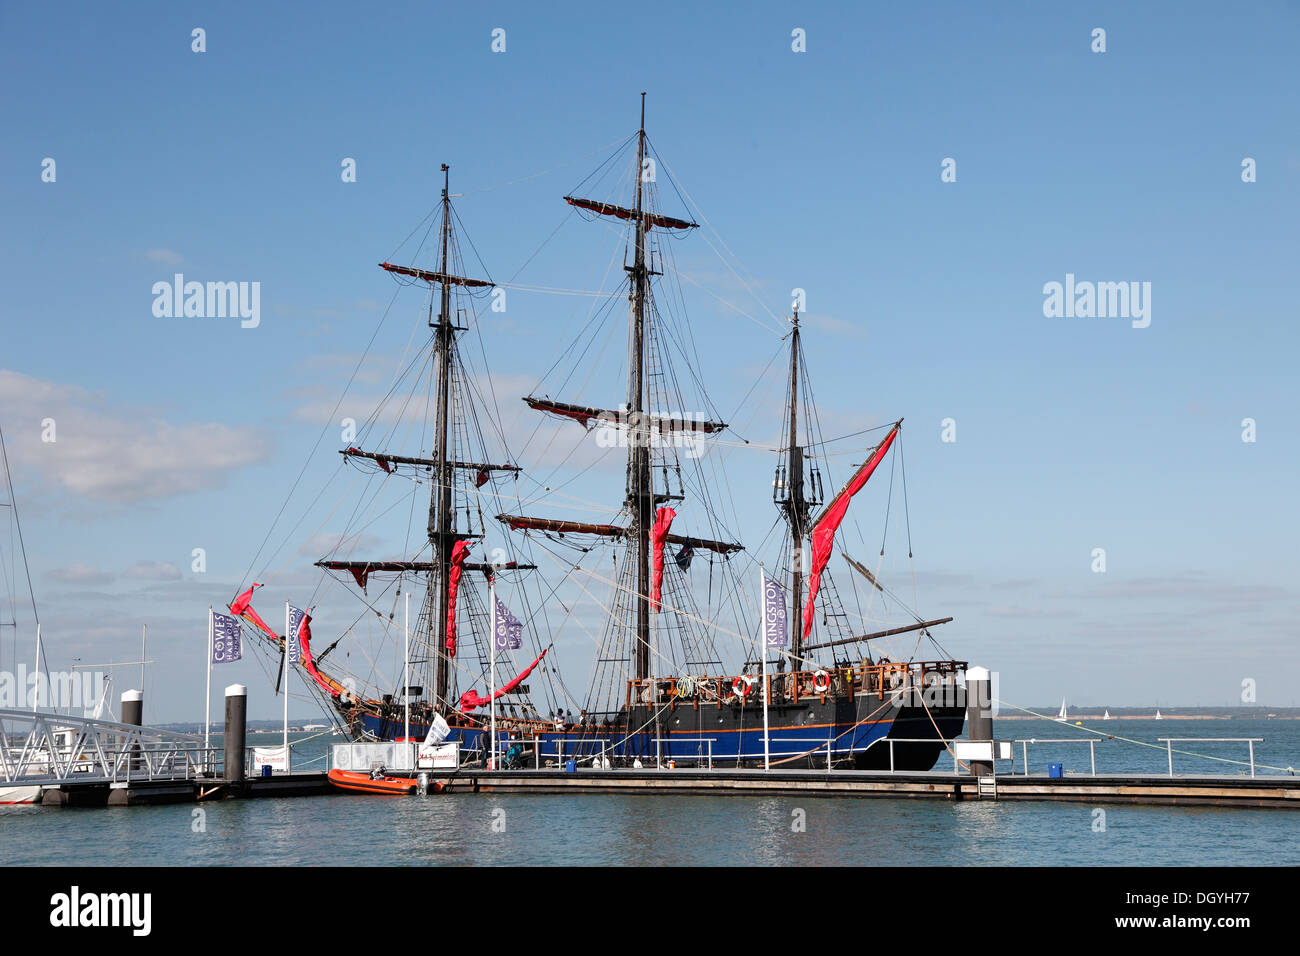 Earl of Pembroke sailing ship tied up at Trinity landing quayside Cowes, Isle of Wight, Hampshire, England Stock Photo